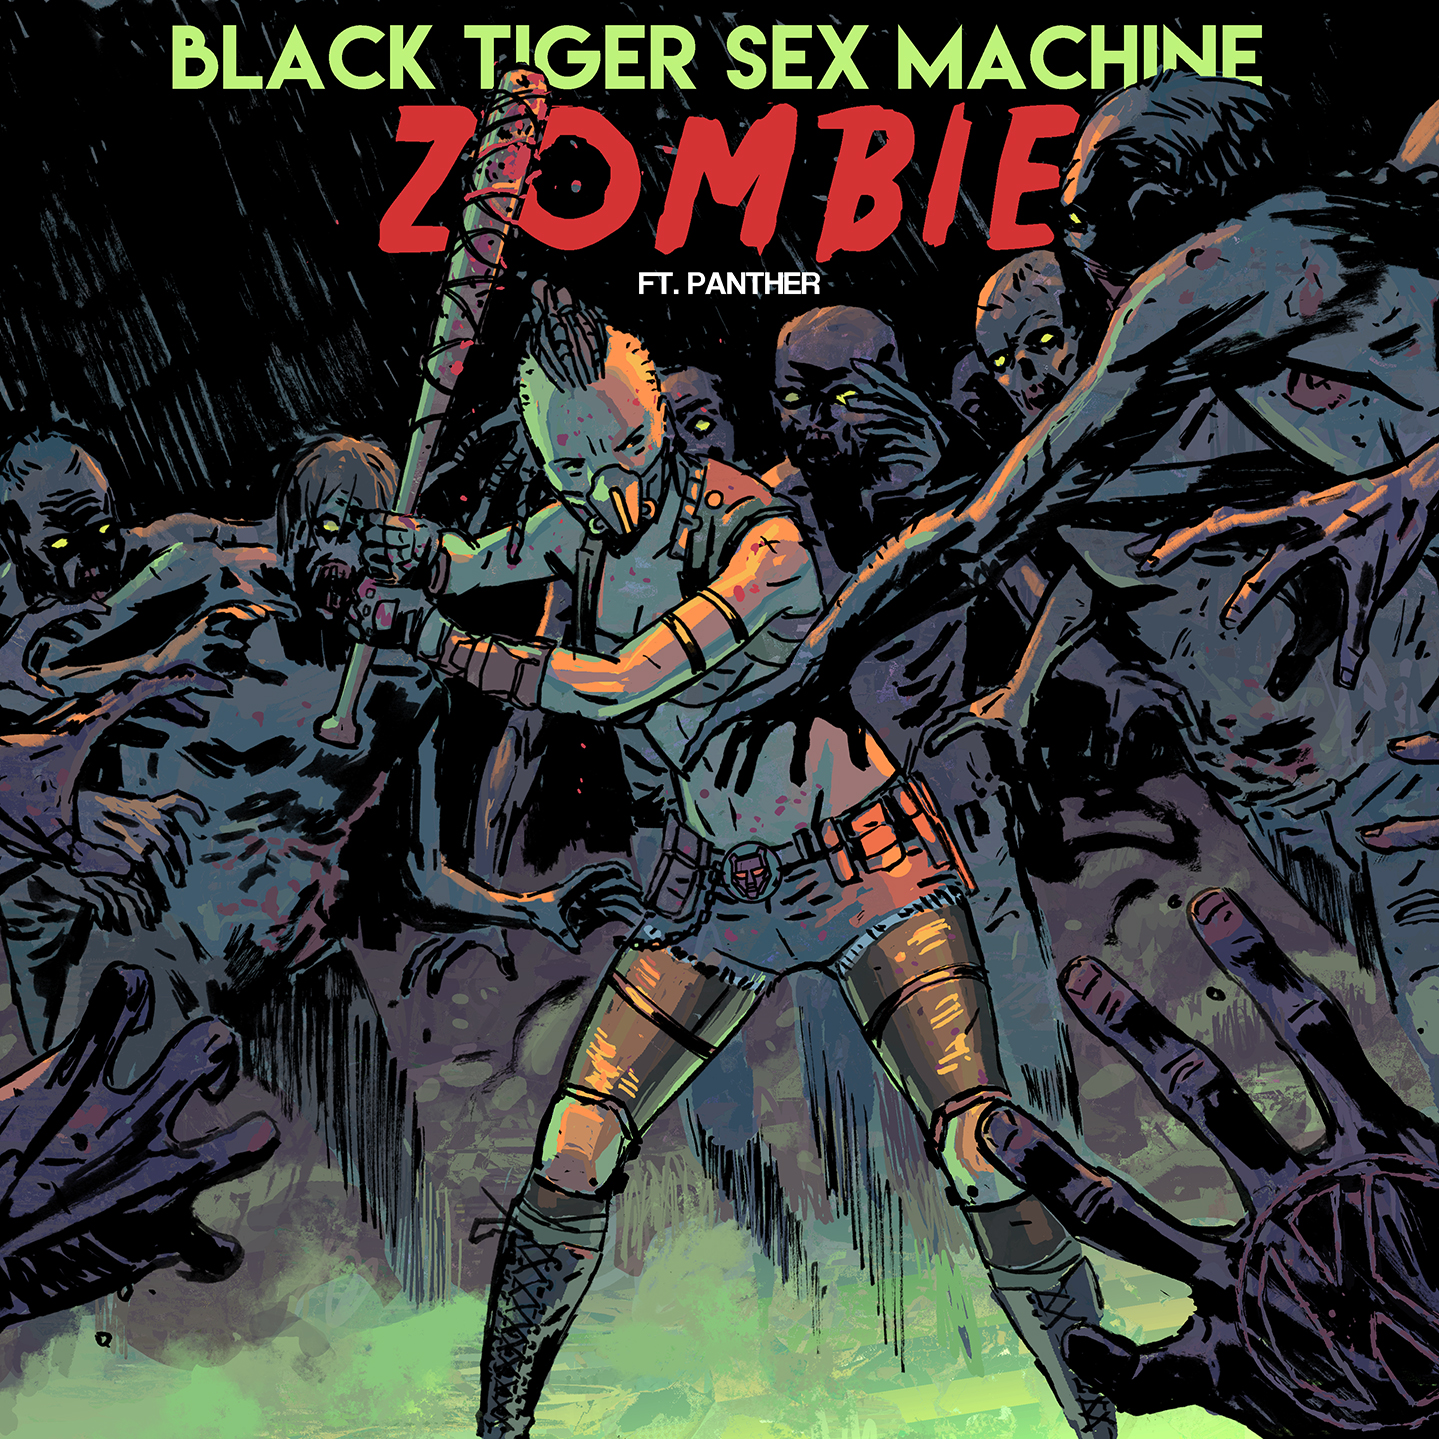 Black Tiger Sex Machine Release Filthy Track Zombie 